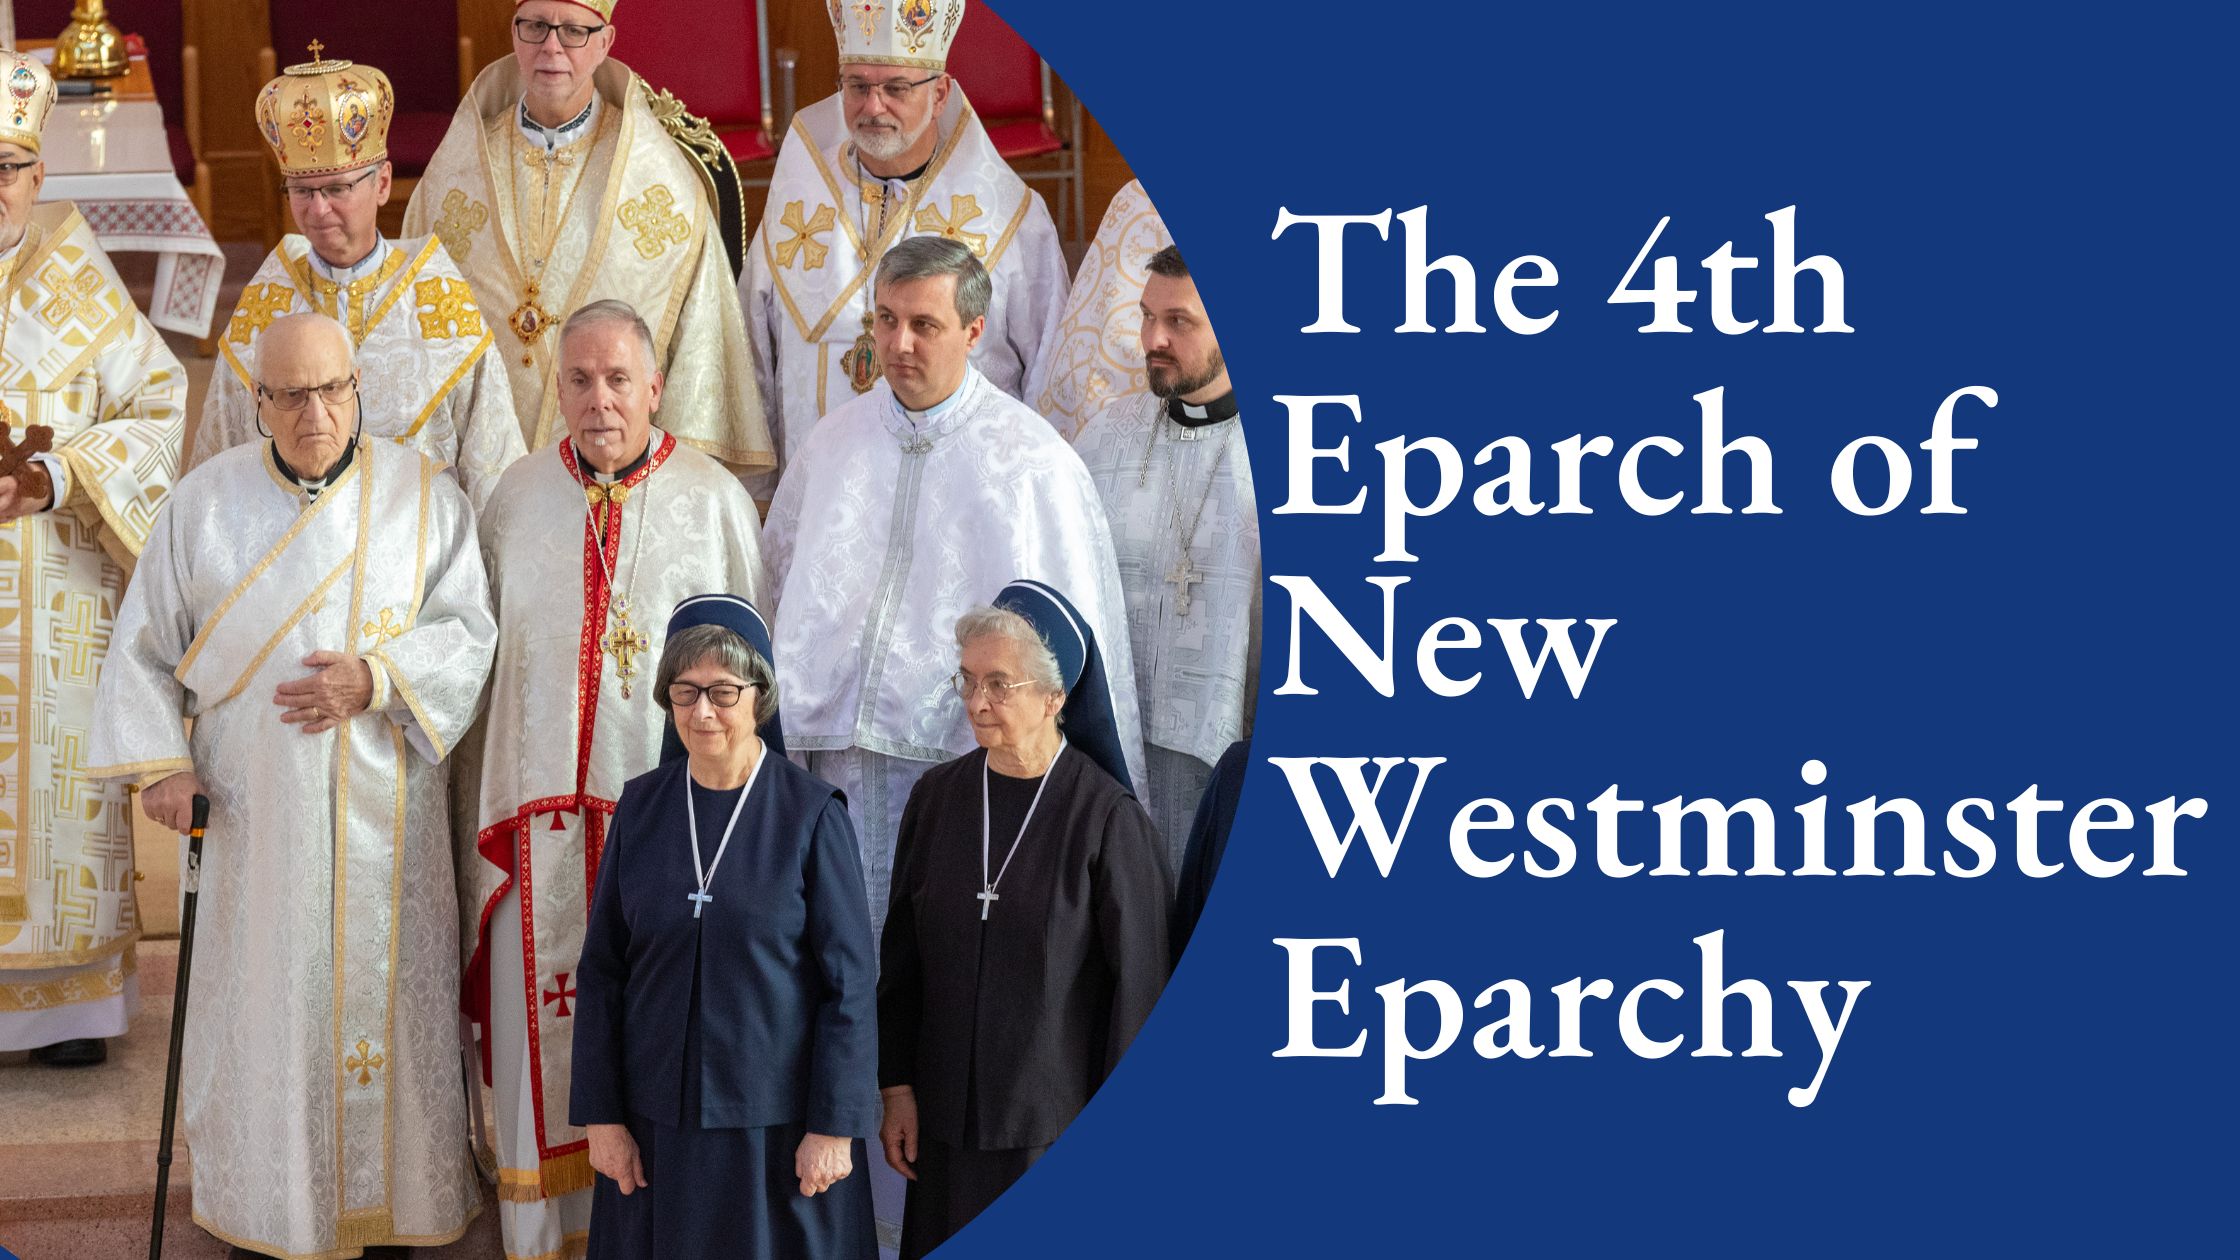 The 4th Eparch of New Westminster Eparchy